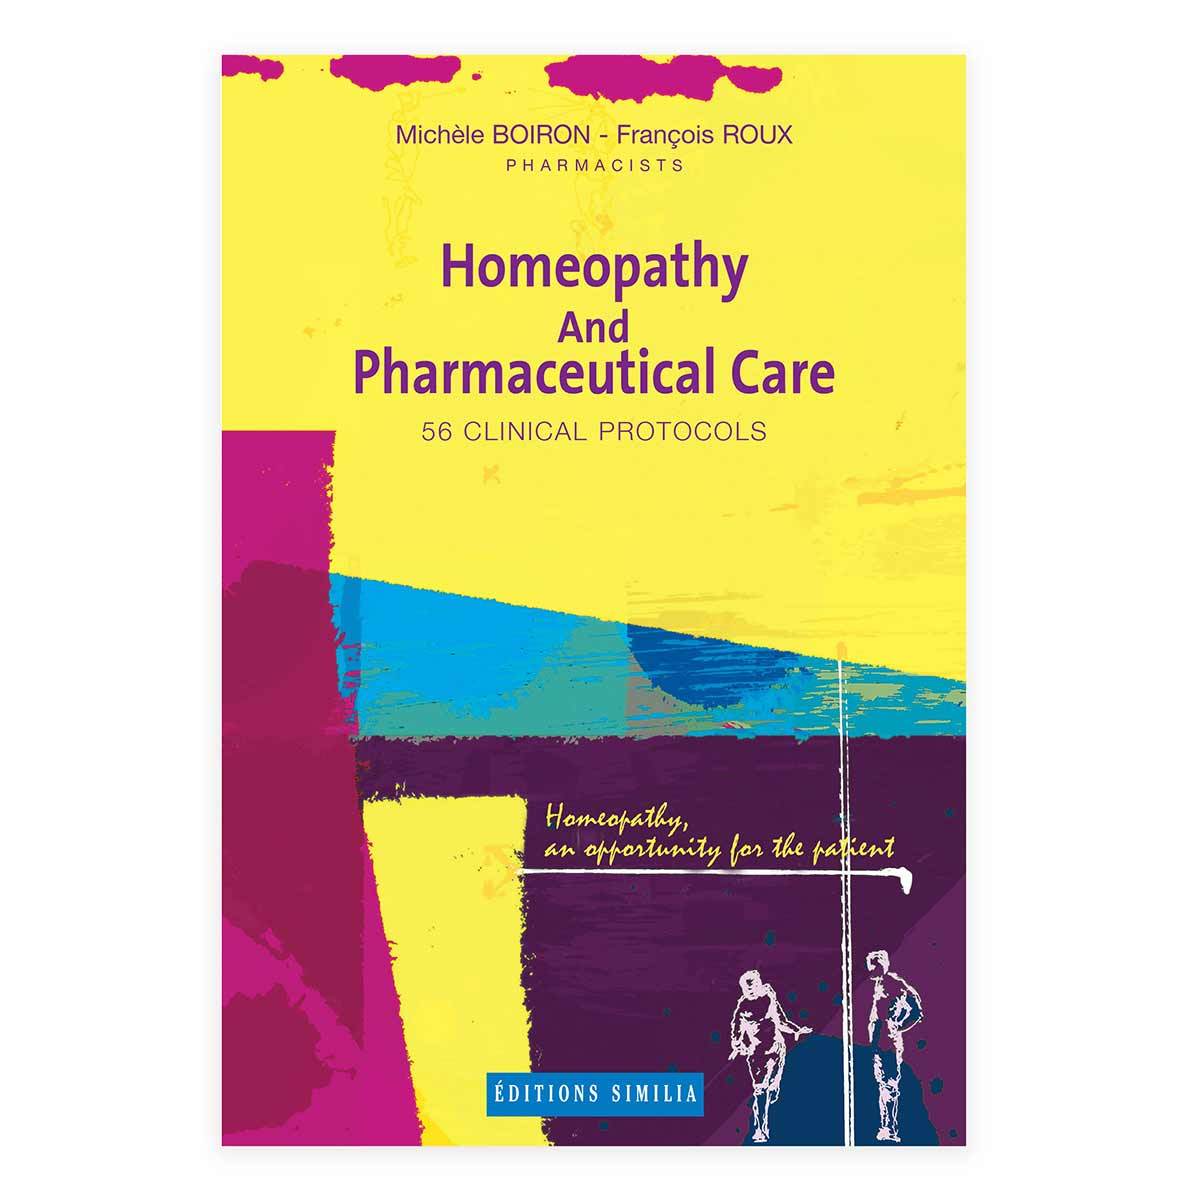 Primary image of Homeopathy and Pharmaceutical Care